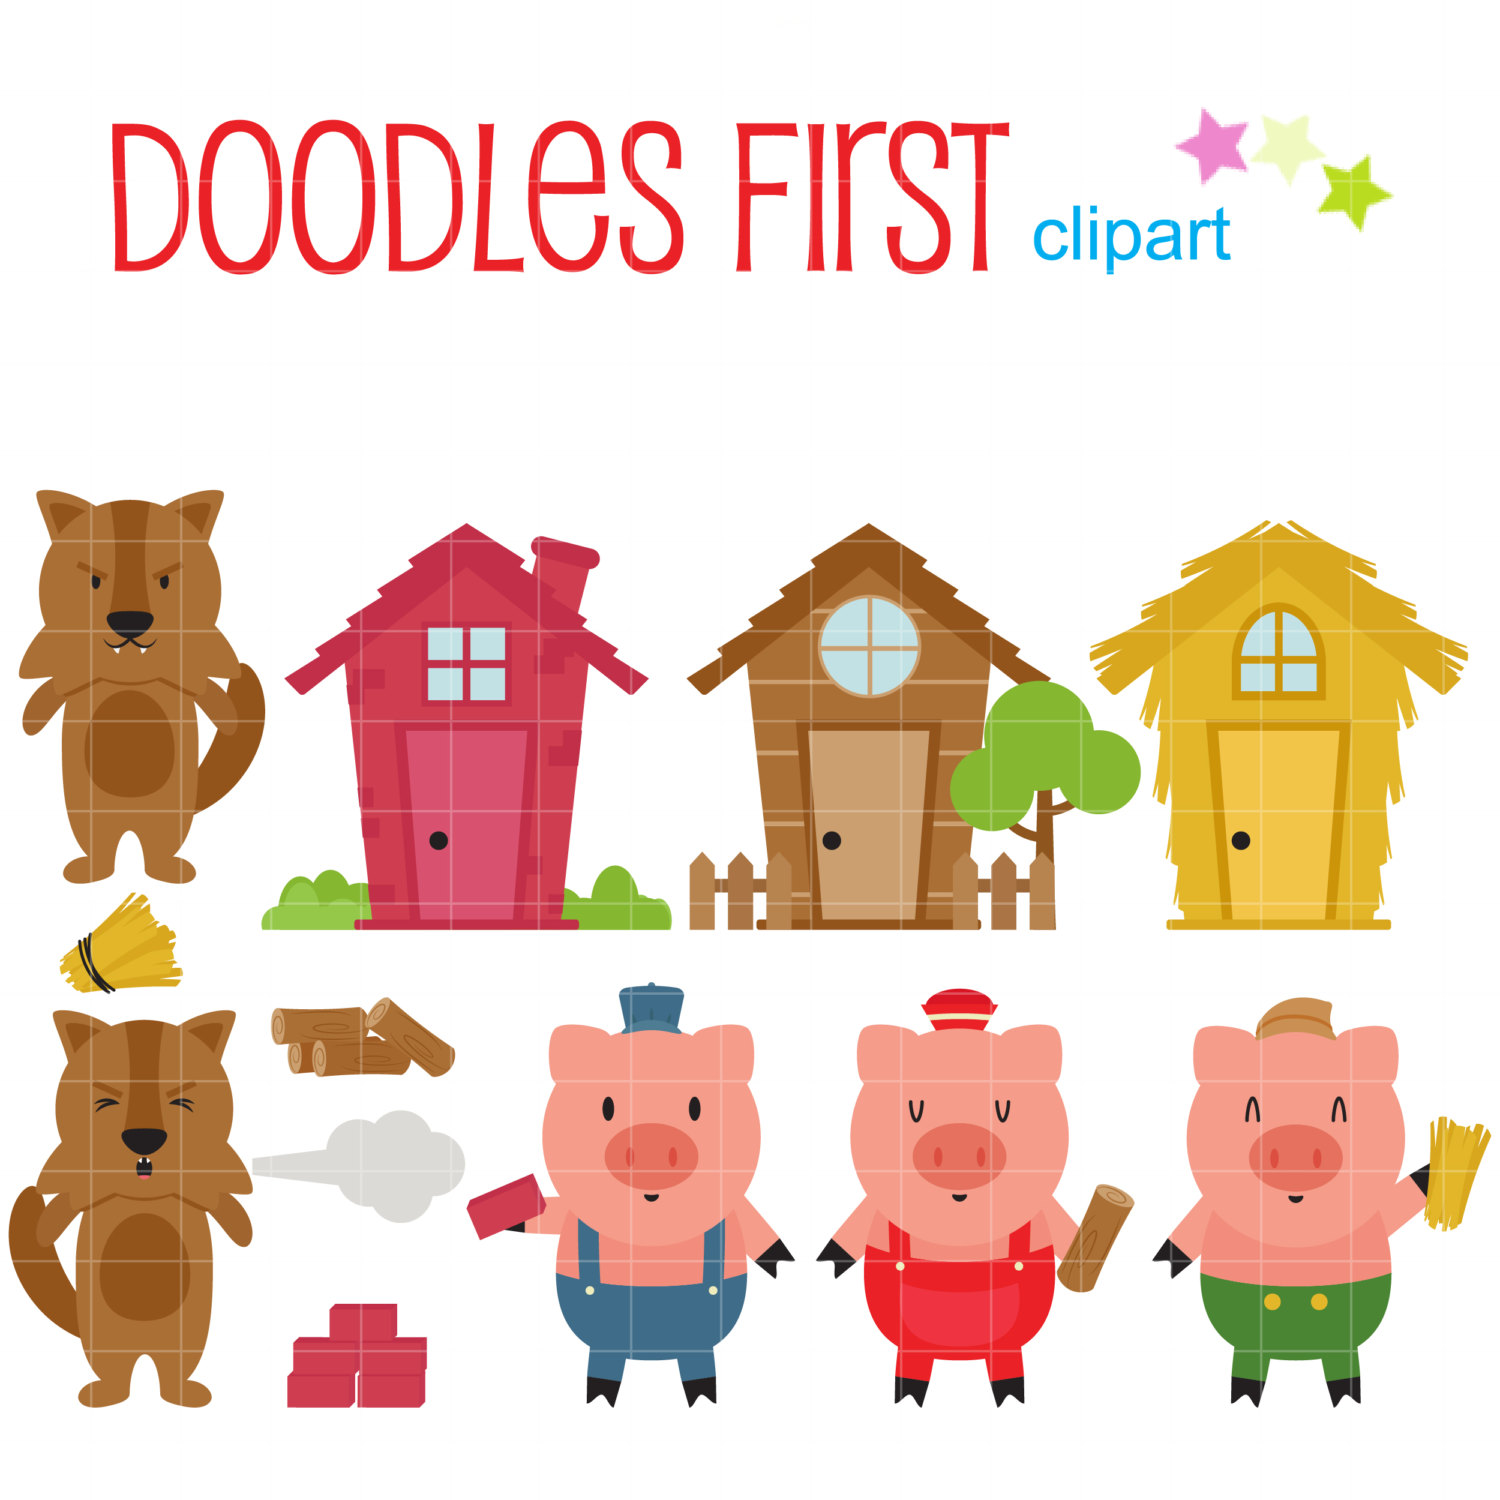 Three Little Pigs Clip Art for Scrapbooking Card Making